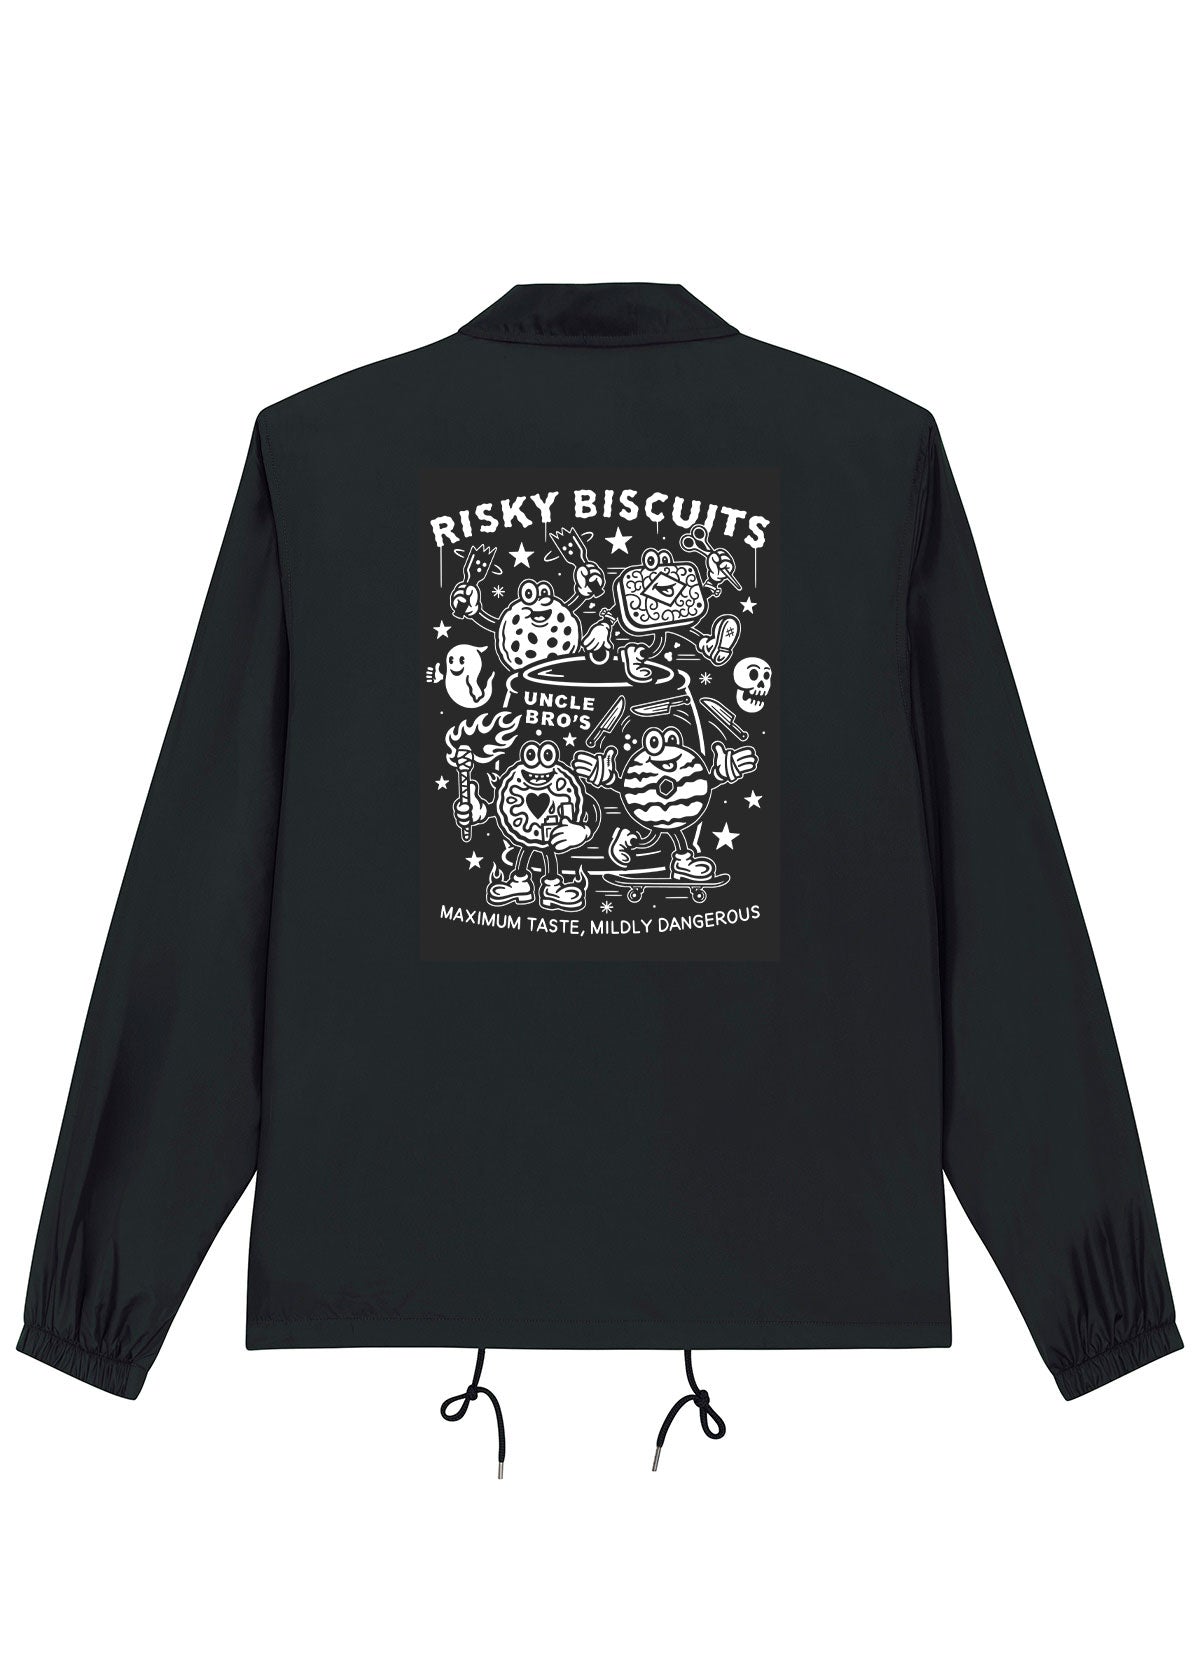 Risky Biscuits Coach Jacket